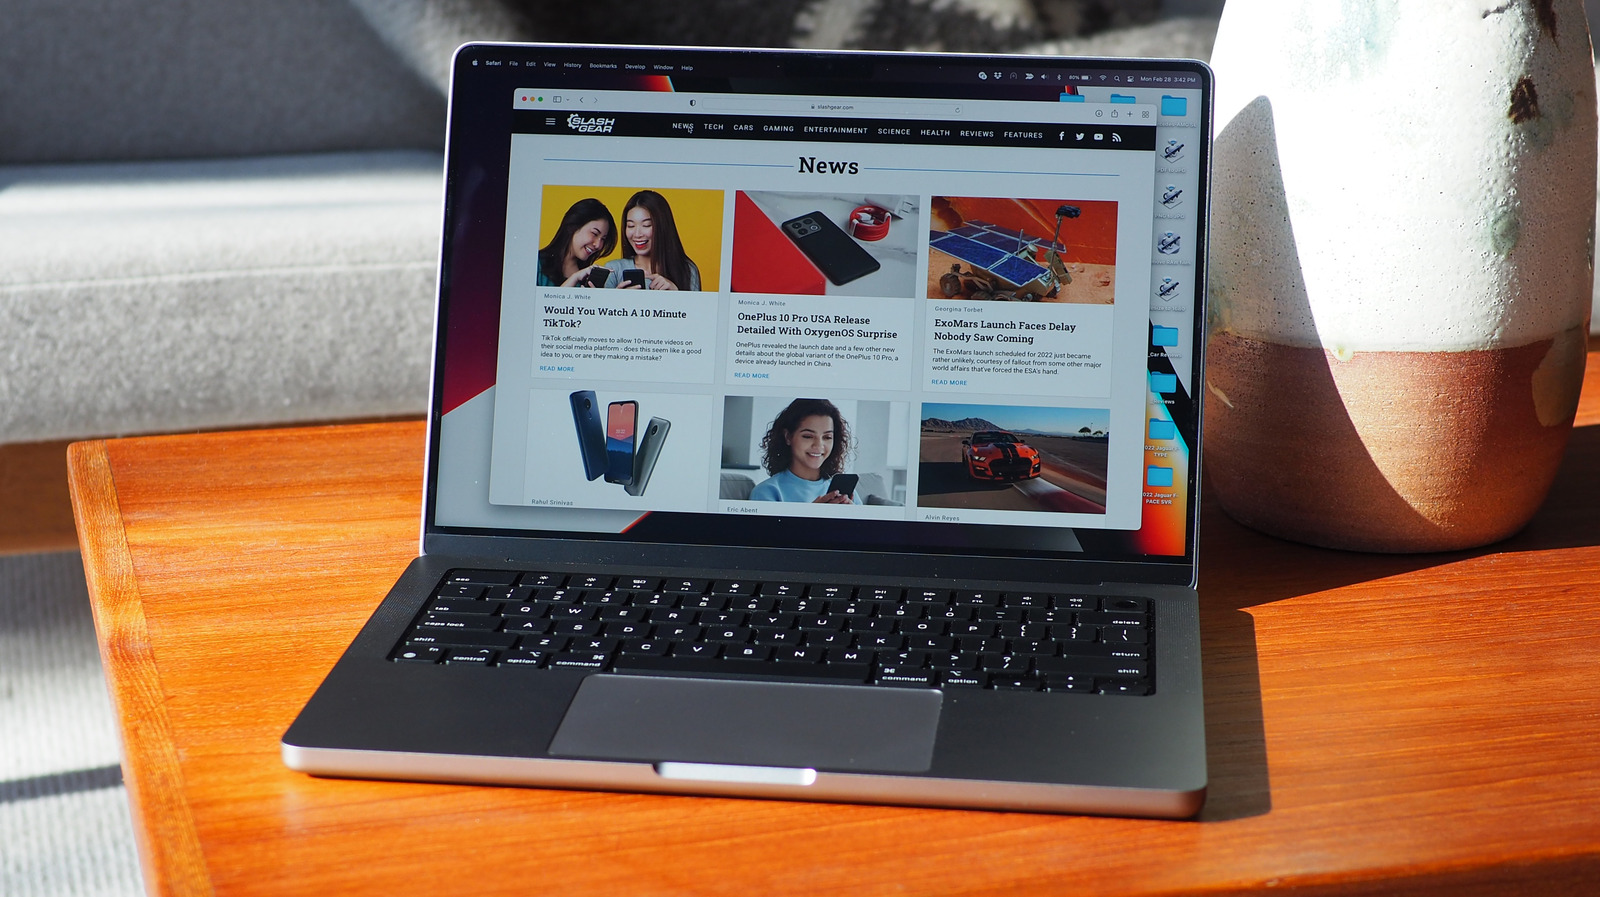 MacBook Pro M1 Pro 14-inch review - a new benchmark for power and